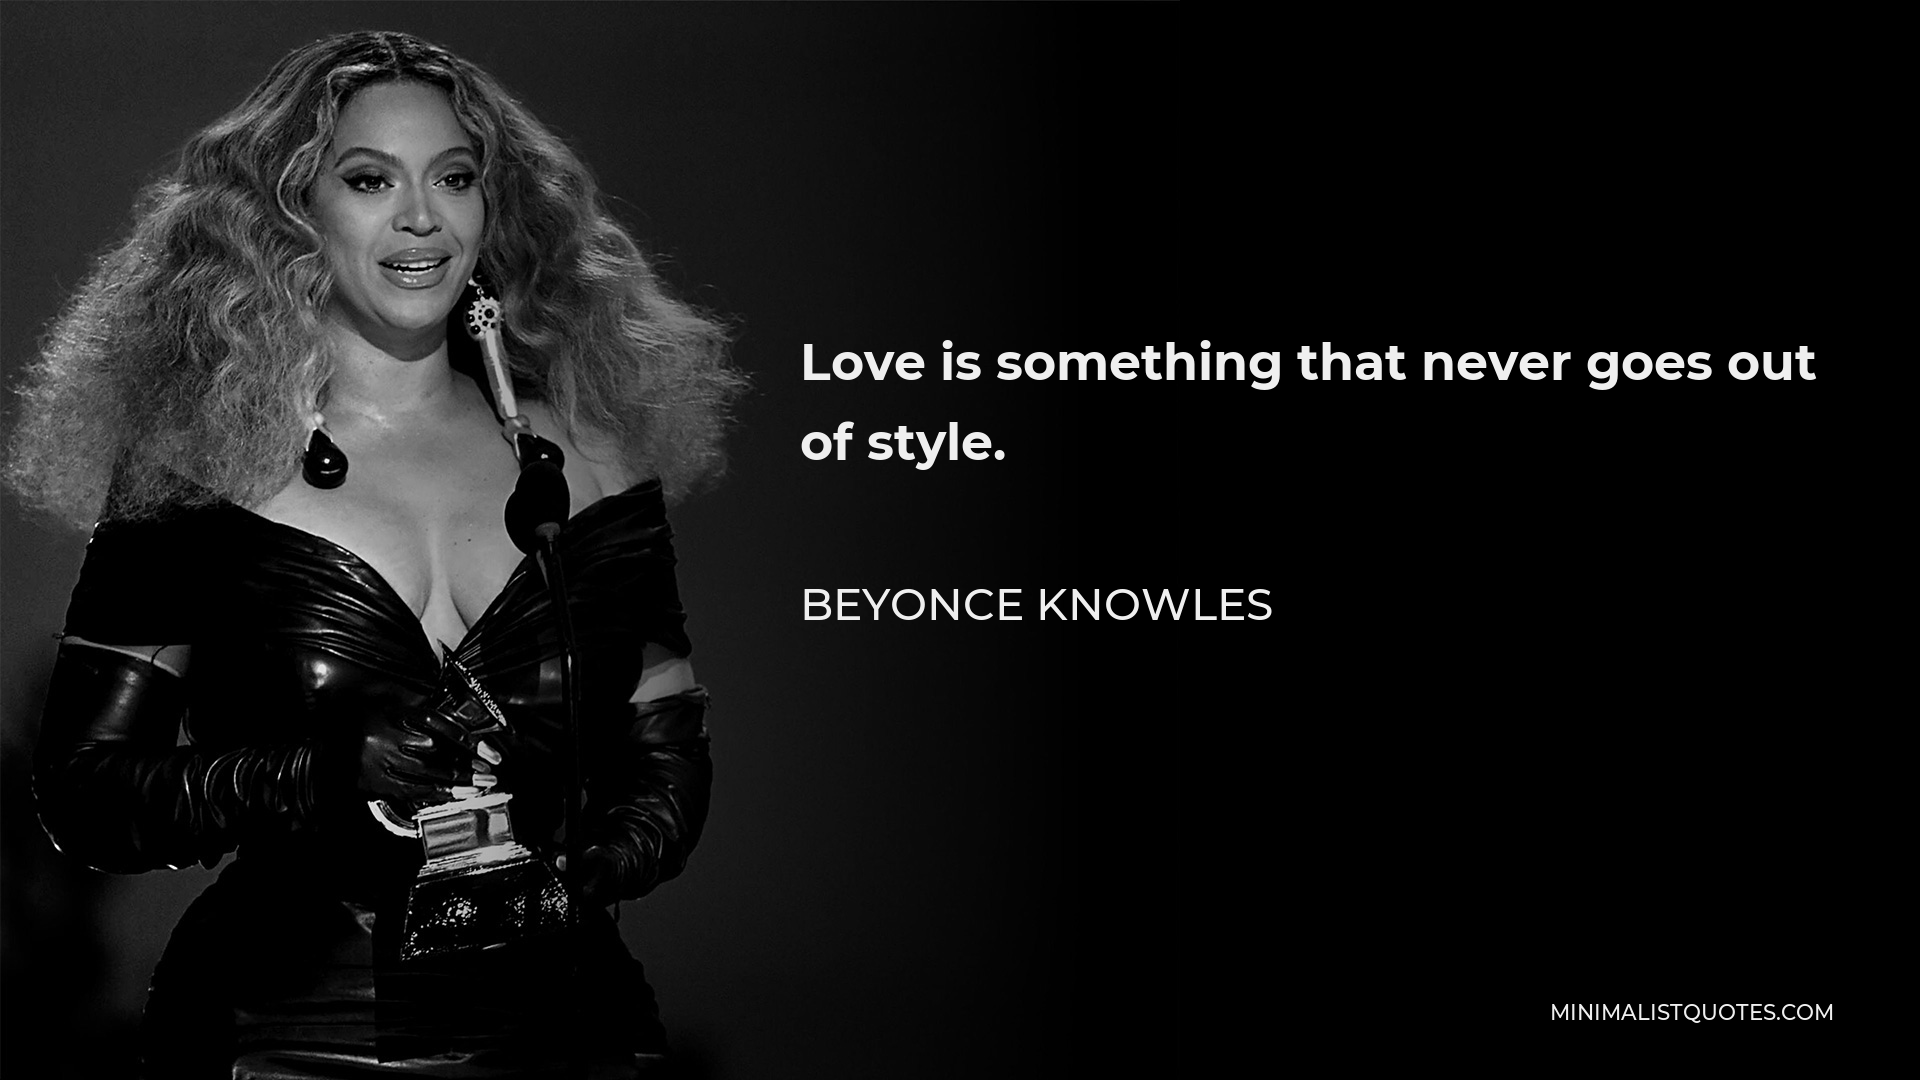 Beyonce Knowles Quote - Love is something that never goes out of style.